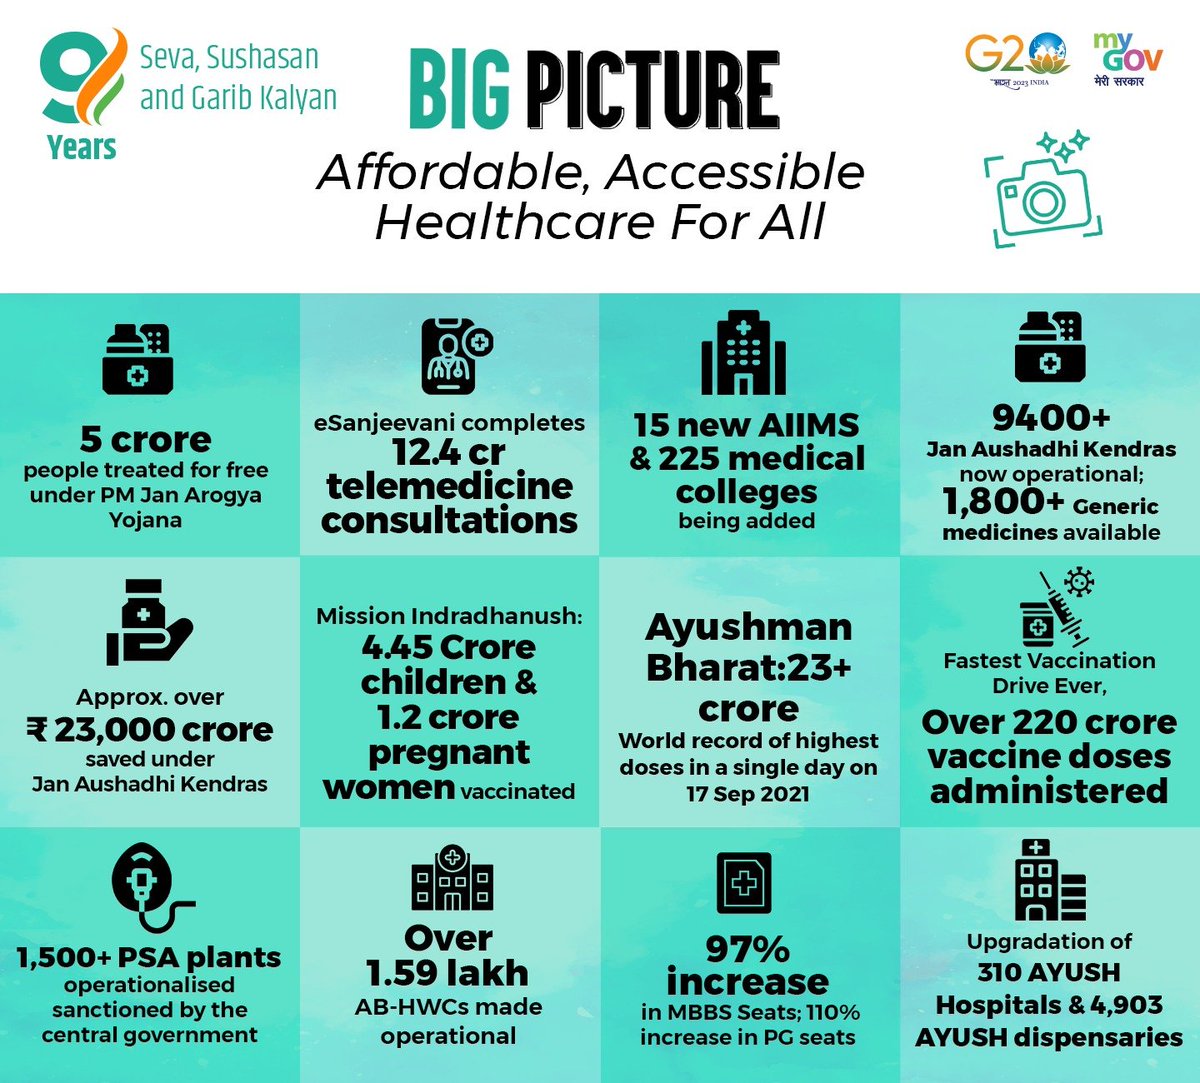 9 years of #NewIndia's healthcare in one powerful snapshot! 💙💉

From expanded coverage to groundbreaking advancements, here's a summary of #9YearsOfHealthForAll 

#9YearsOfSeva #ModiGovt  #Health4all #HealthyIndia #SwasthaBharat 
@PMOIndia @MoHFW_INDIA @BJP4India @JPNadda